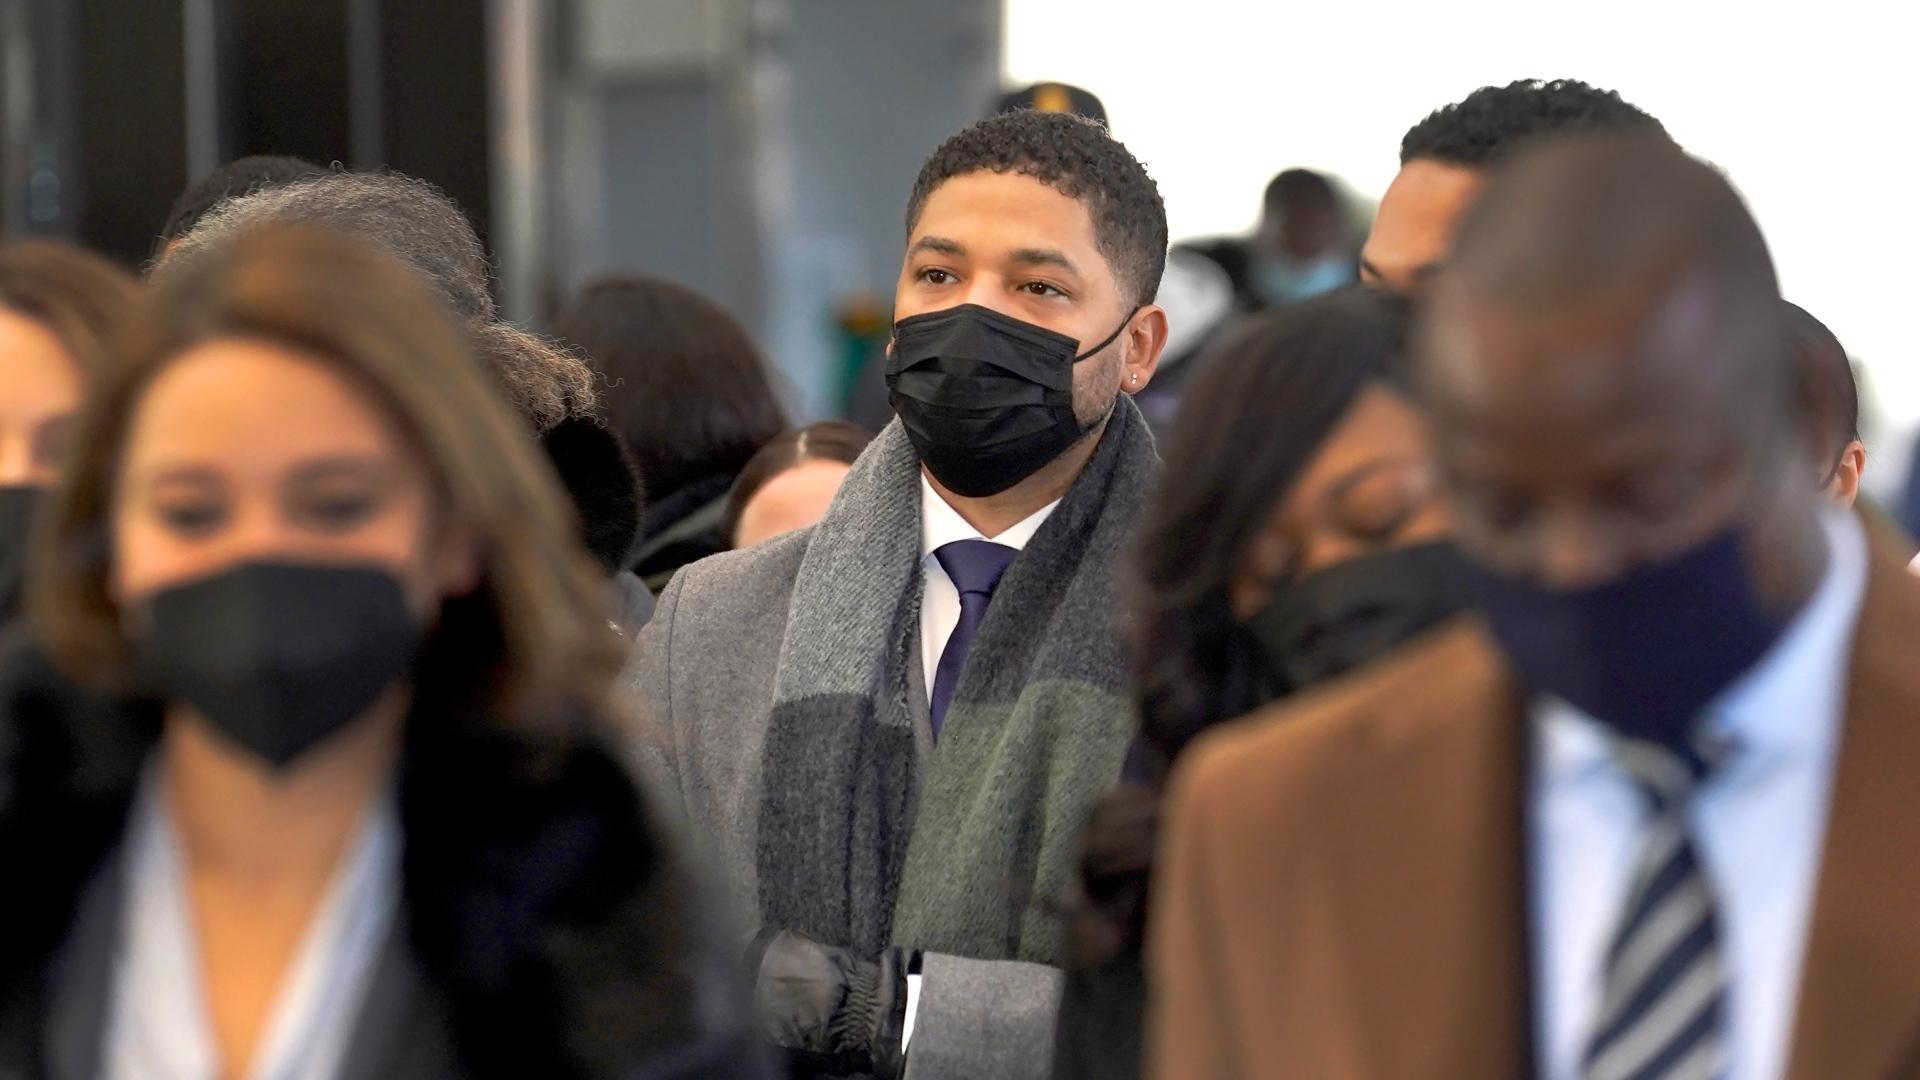 Actor Jussie Smollett arrives at the Leighton Criminal Courthouse on Wednesday, Dec. 8, 2021, day seven of his trial in Chicago. (AP Photo / Charles Rex Arbogast)